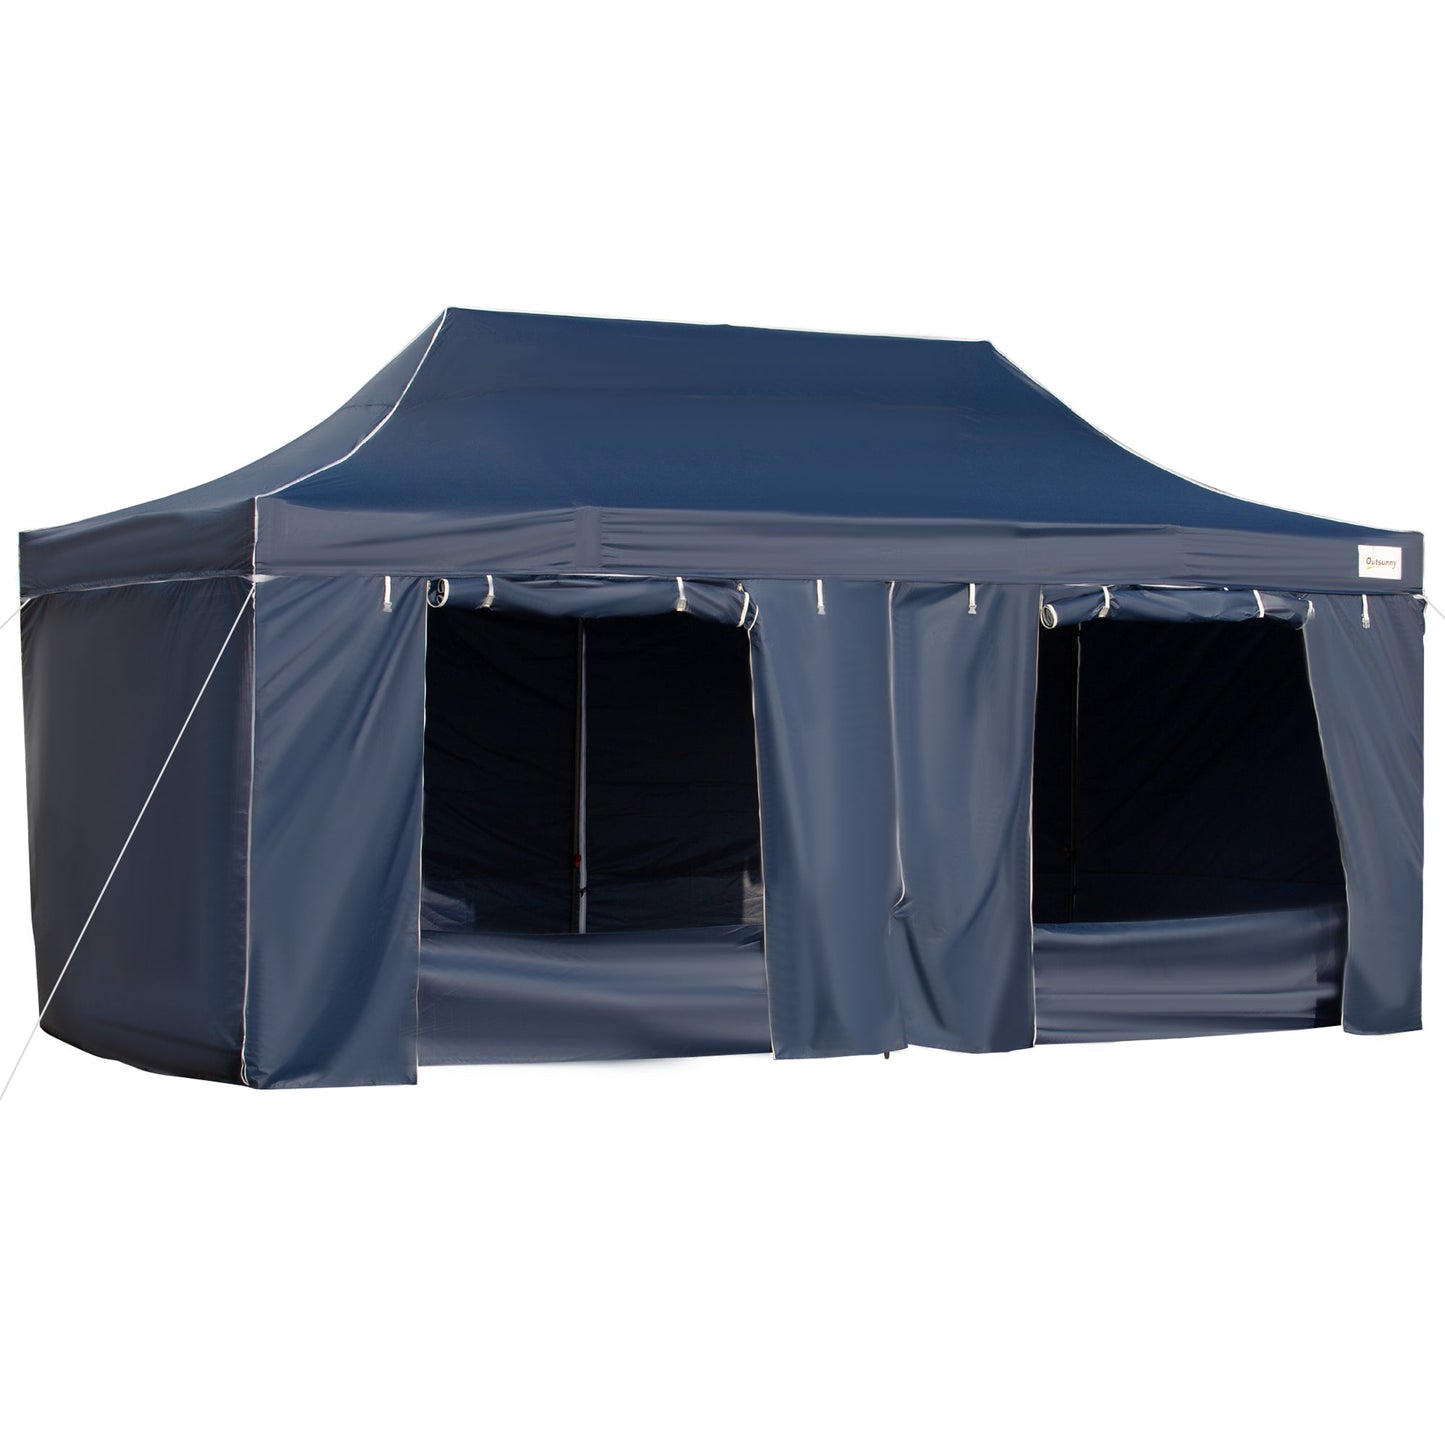 Miscellaneous-10' x 20' Heavy Duty Pop Up Canopy with 7 Removable Zippered Sidewall, Bottom Privacy Sidewall, Roller Bag, Upgraded Tube, Party Event, Blue - Outdoor Style Company